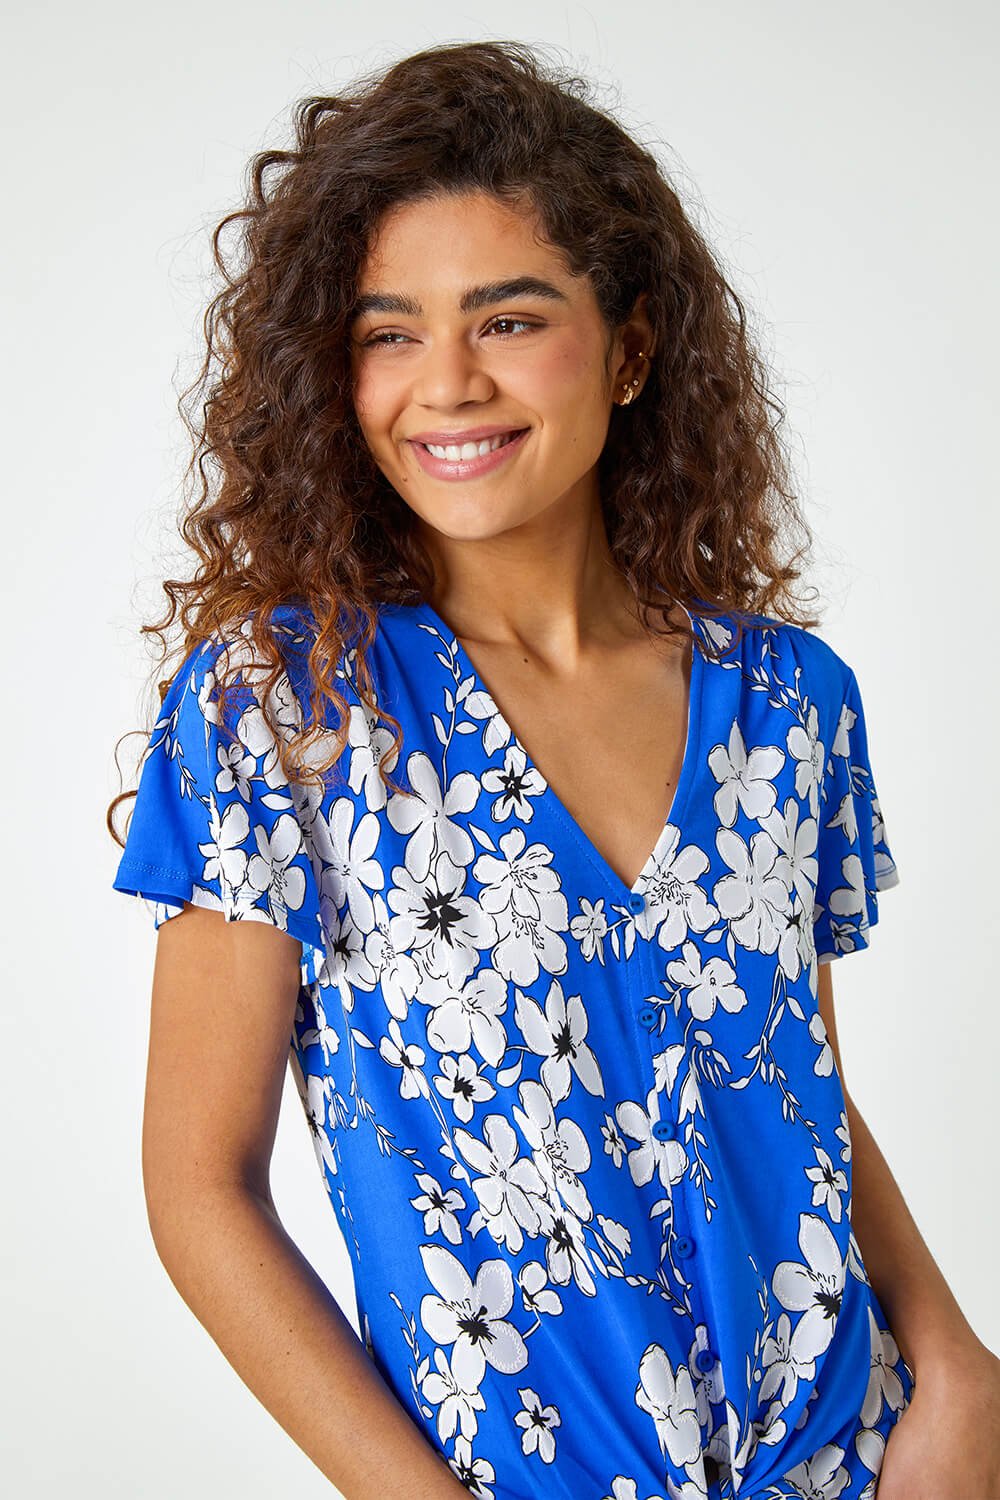 Royal Blue Floral Print Tie Front Top, Image 4 of 5